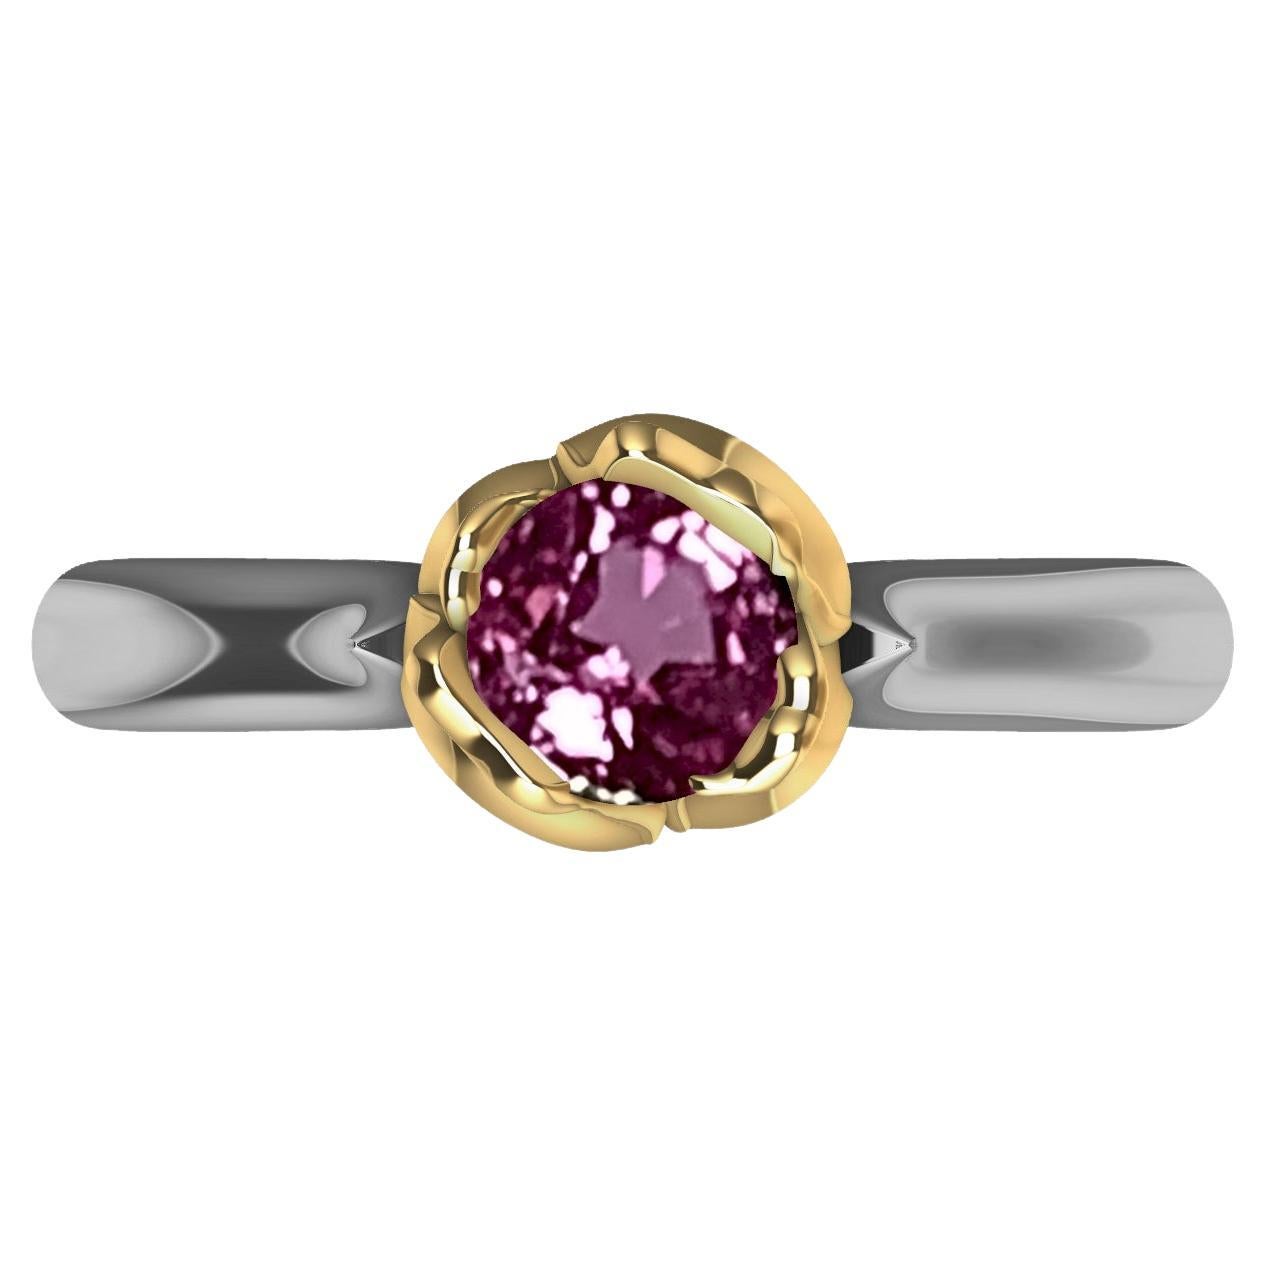 For Sale:  18 Karat Yellow Gold and Platinum Ceritfied Pink Sapphire 1.18 Carat Tulip Ring